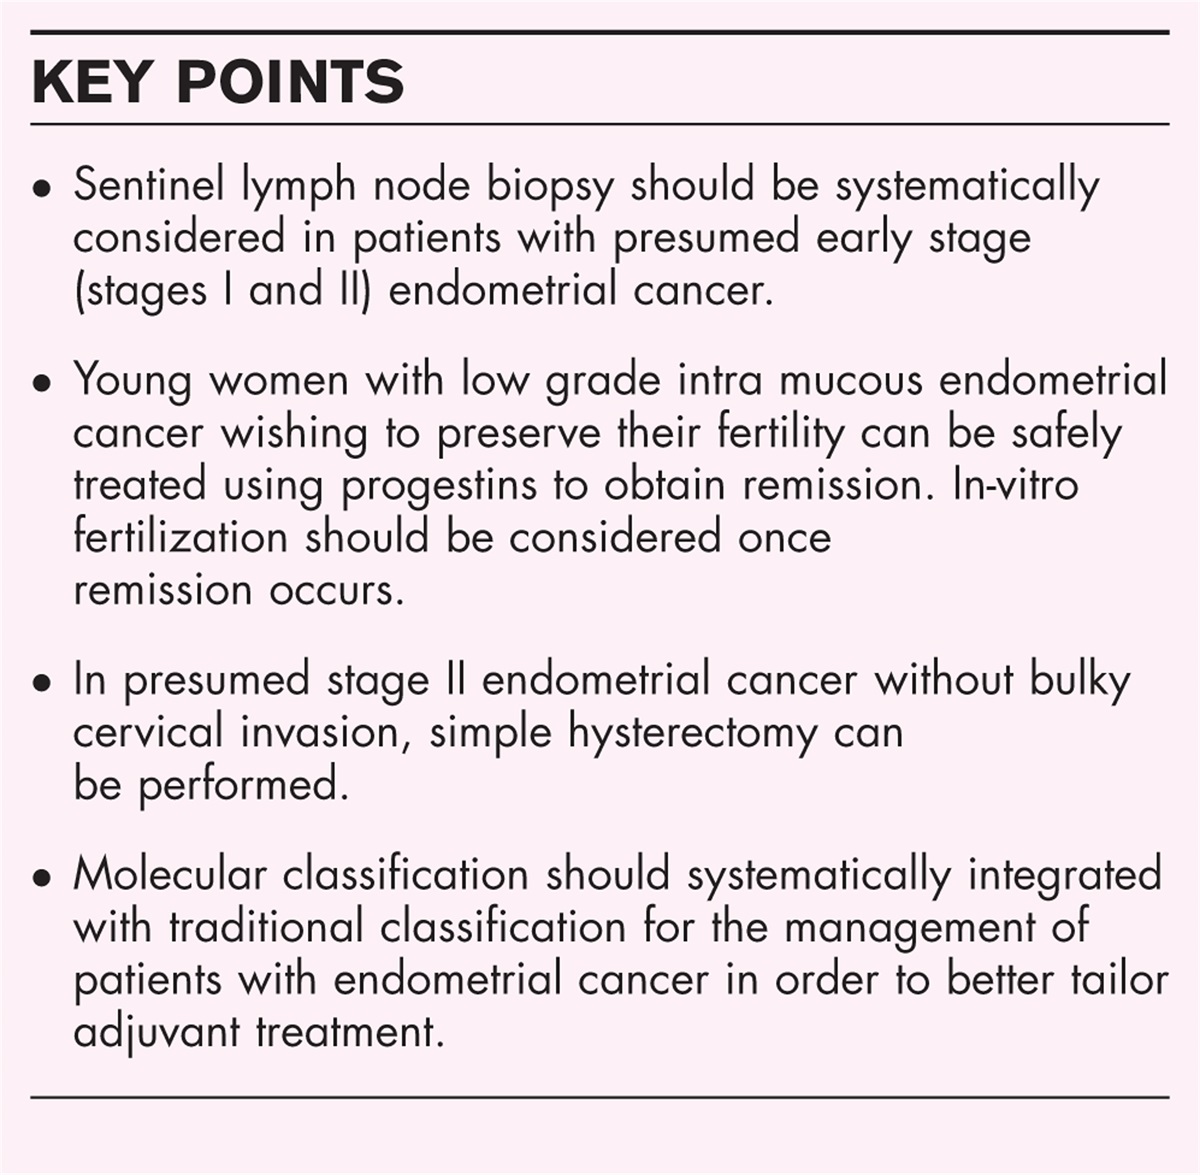 Less is more in endometrial cancer (SLN, conservative treatment, radical hysterectomy, molecular classification)